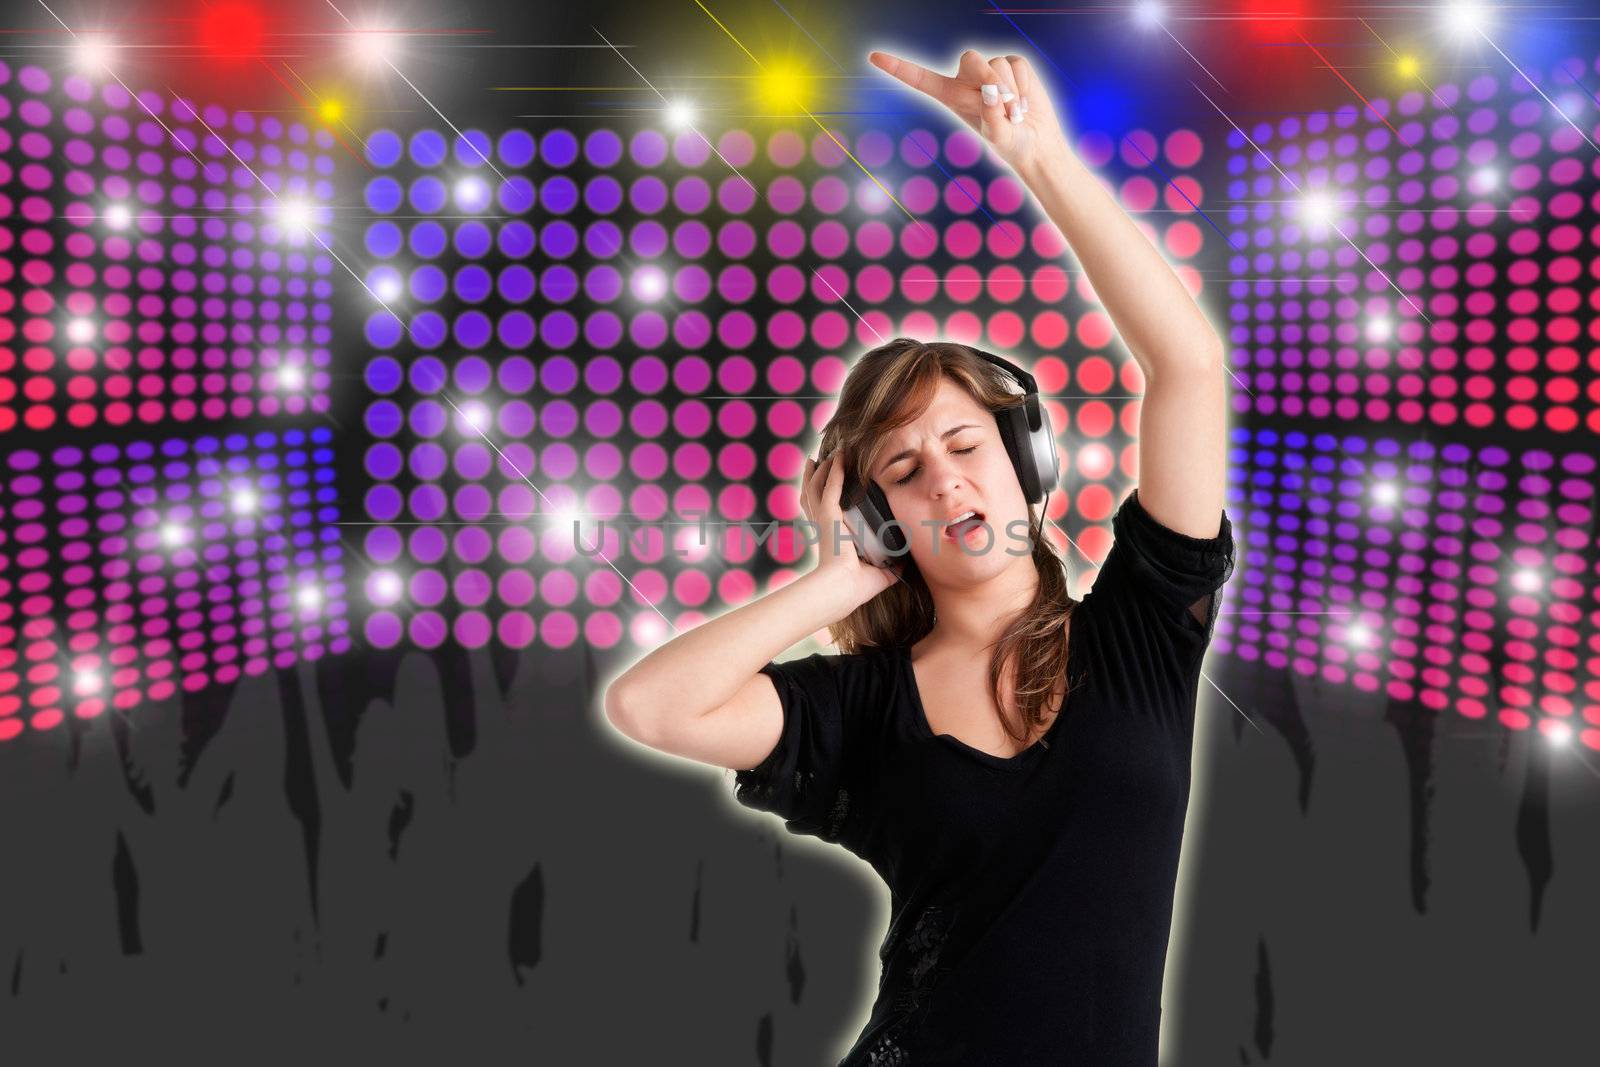 Woman dancing using headphones with disco lights in the background